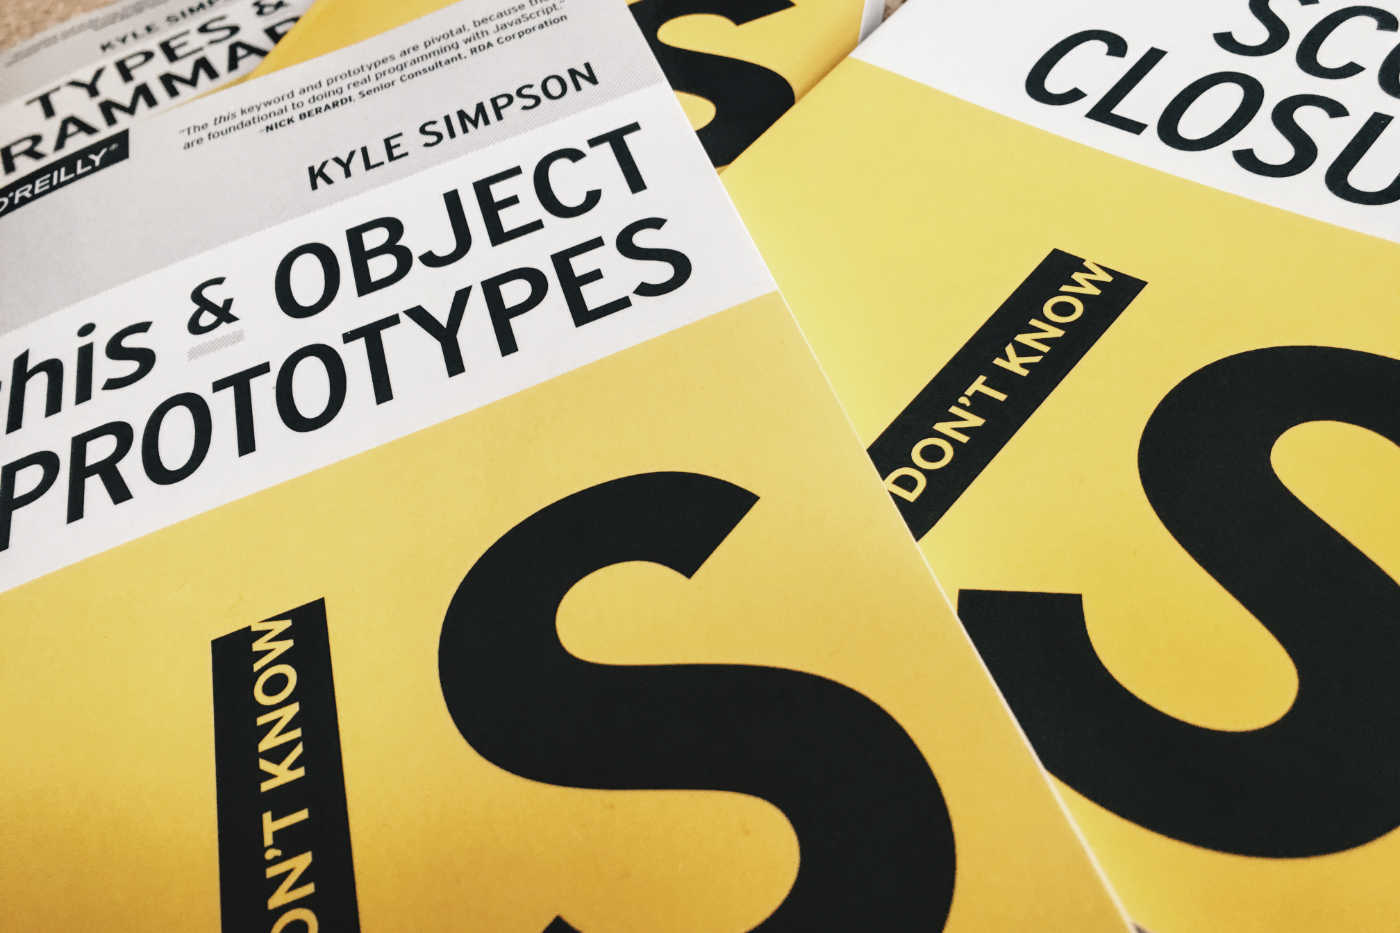 Image of book covers for Kyle Simpson's "You Don't Know JS", the "this and Object Prototype" editions